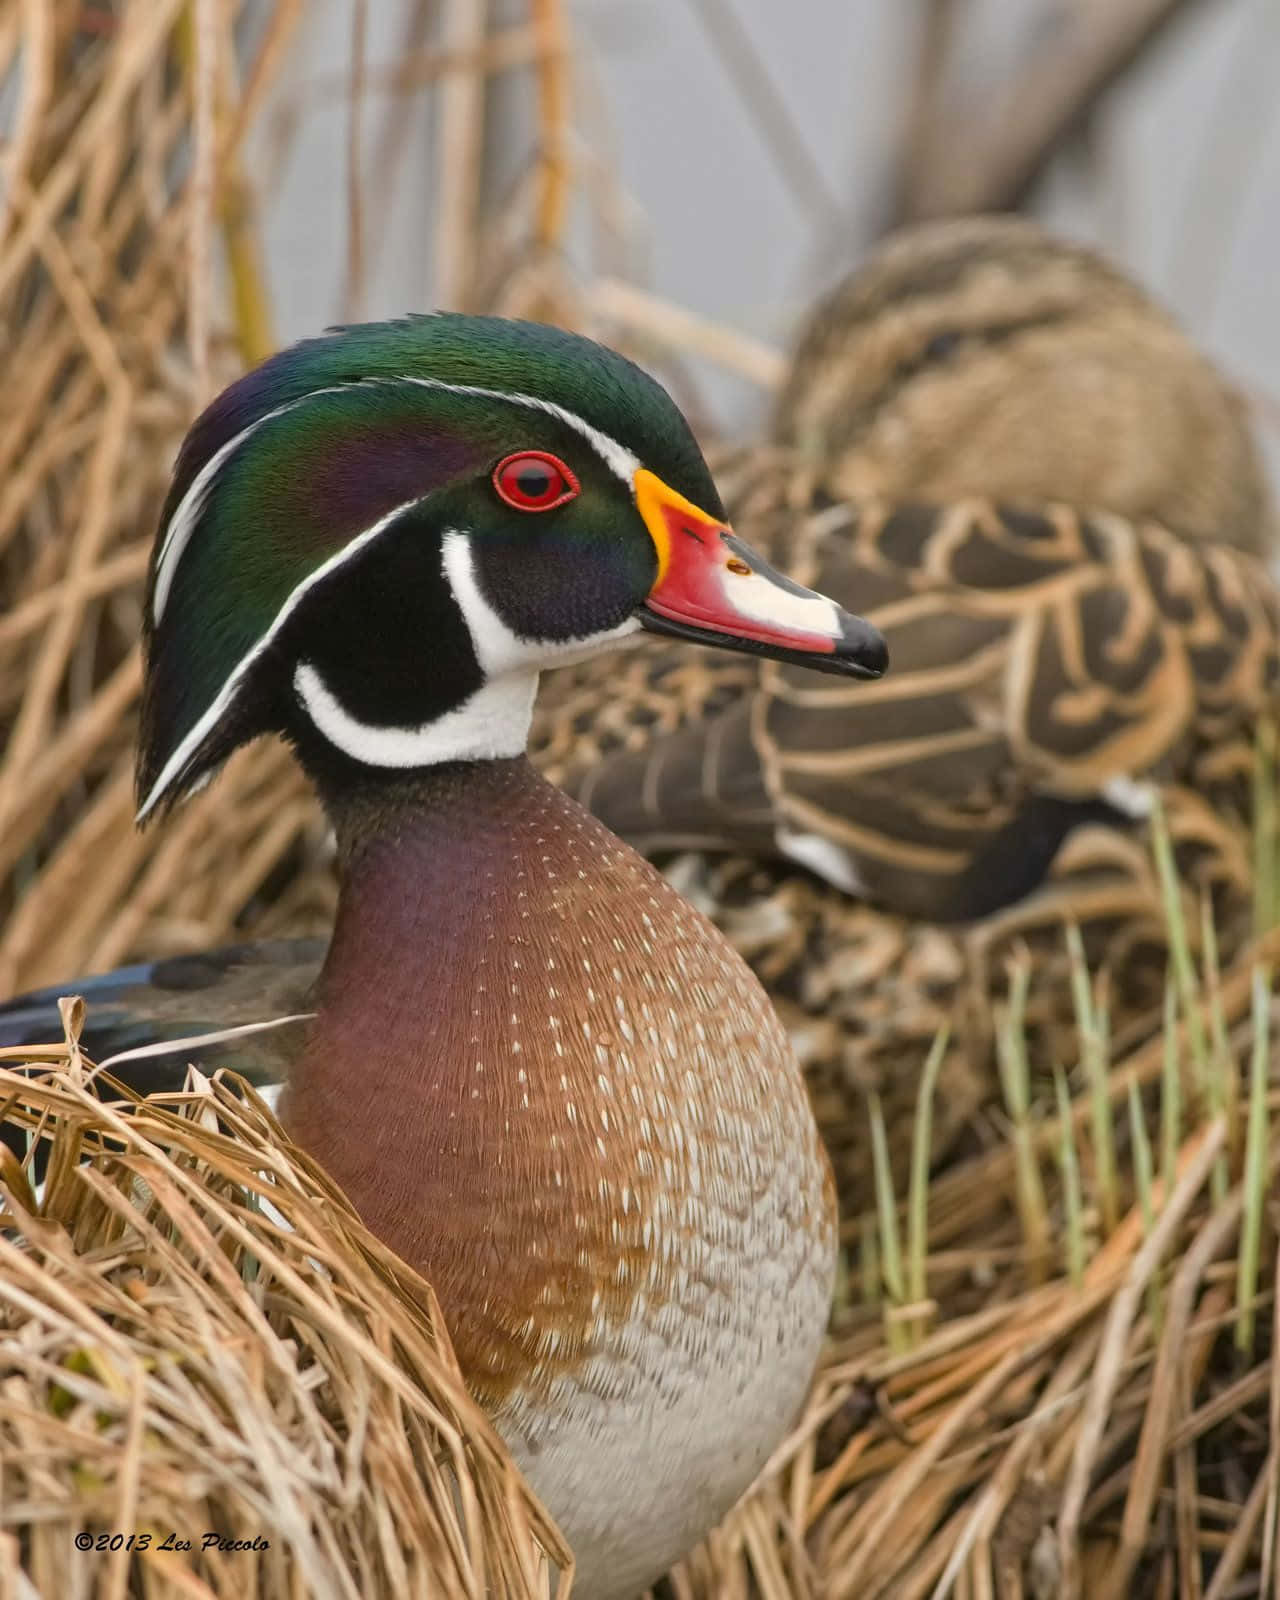 Majestic pair of Wood Ducks in the wild